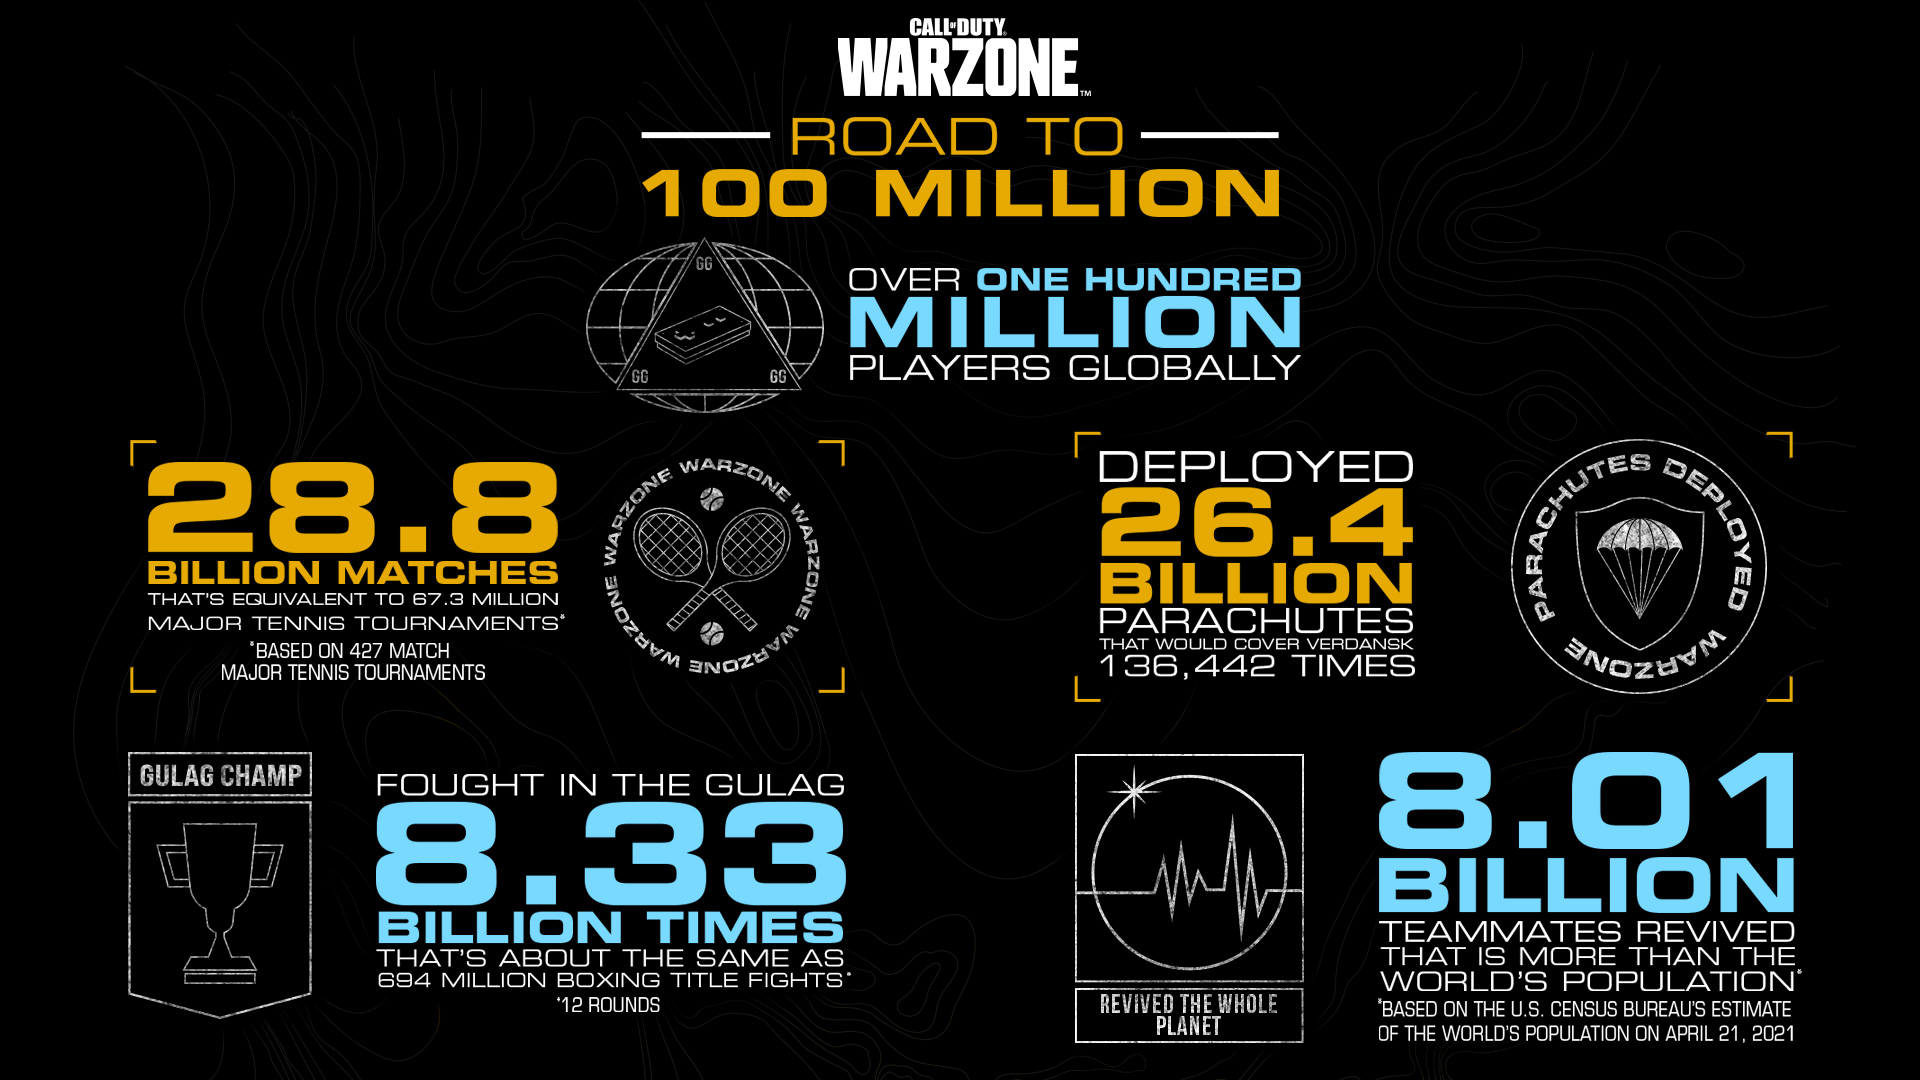 One Year of Call of Duty®: Warzone™ - Our Thanks to the Community